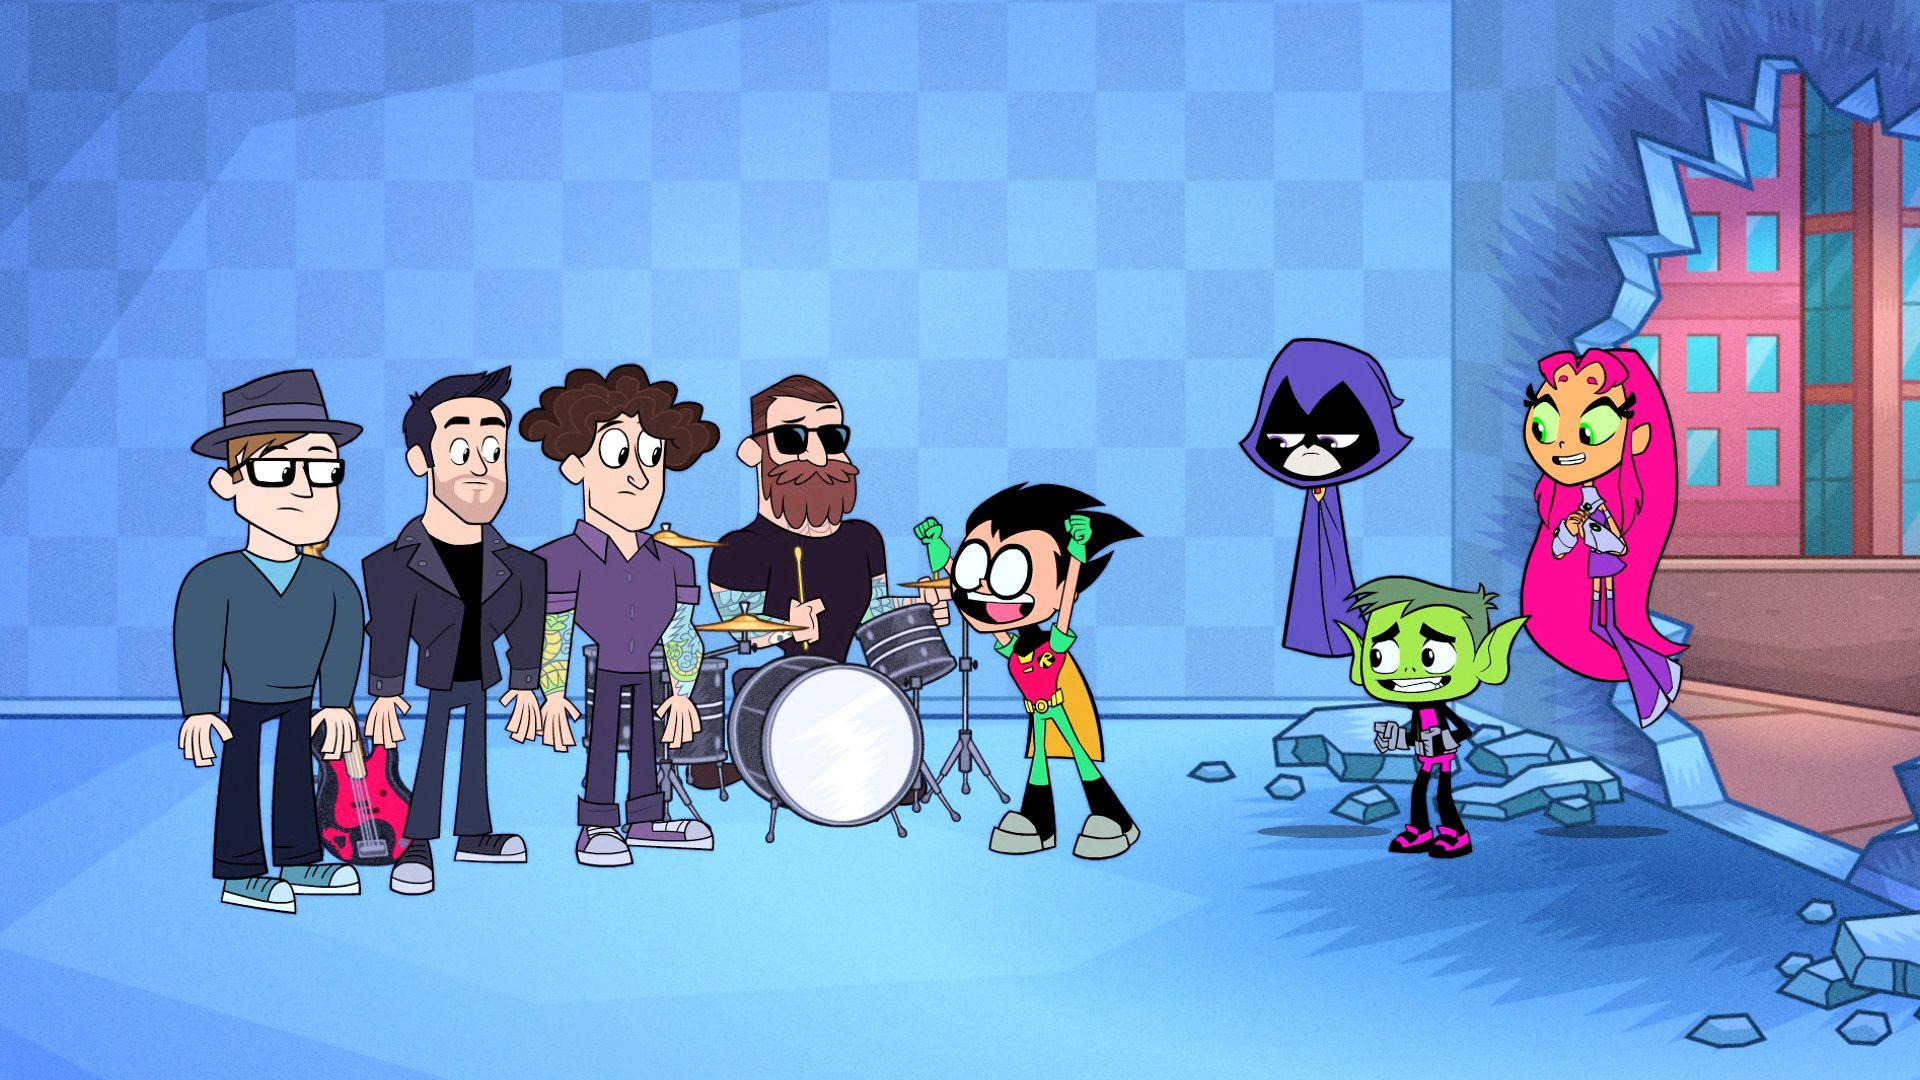 Teen Titans Go! The Night Begins to Shine Week & SDCC Interviews